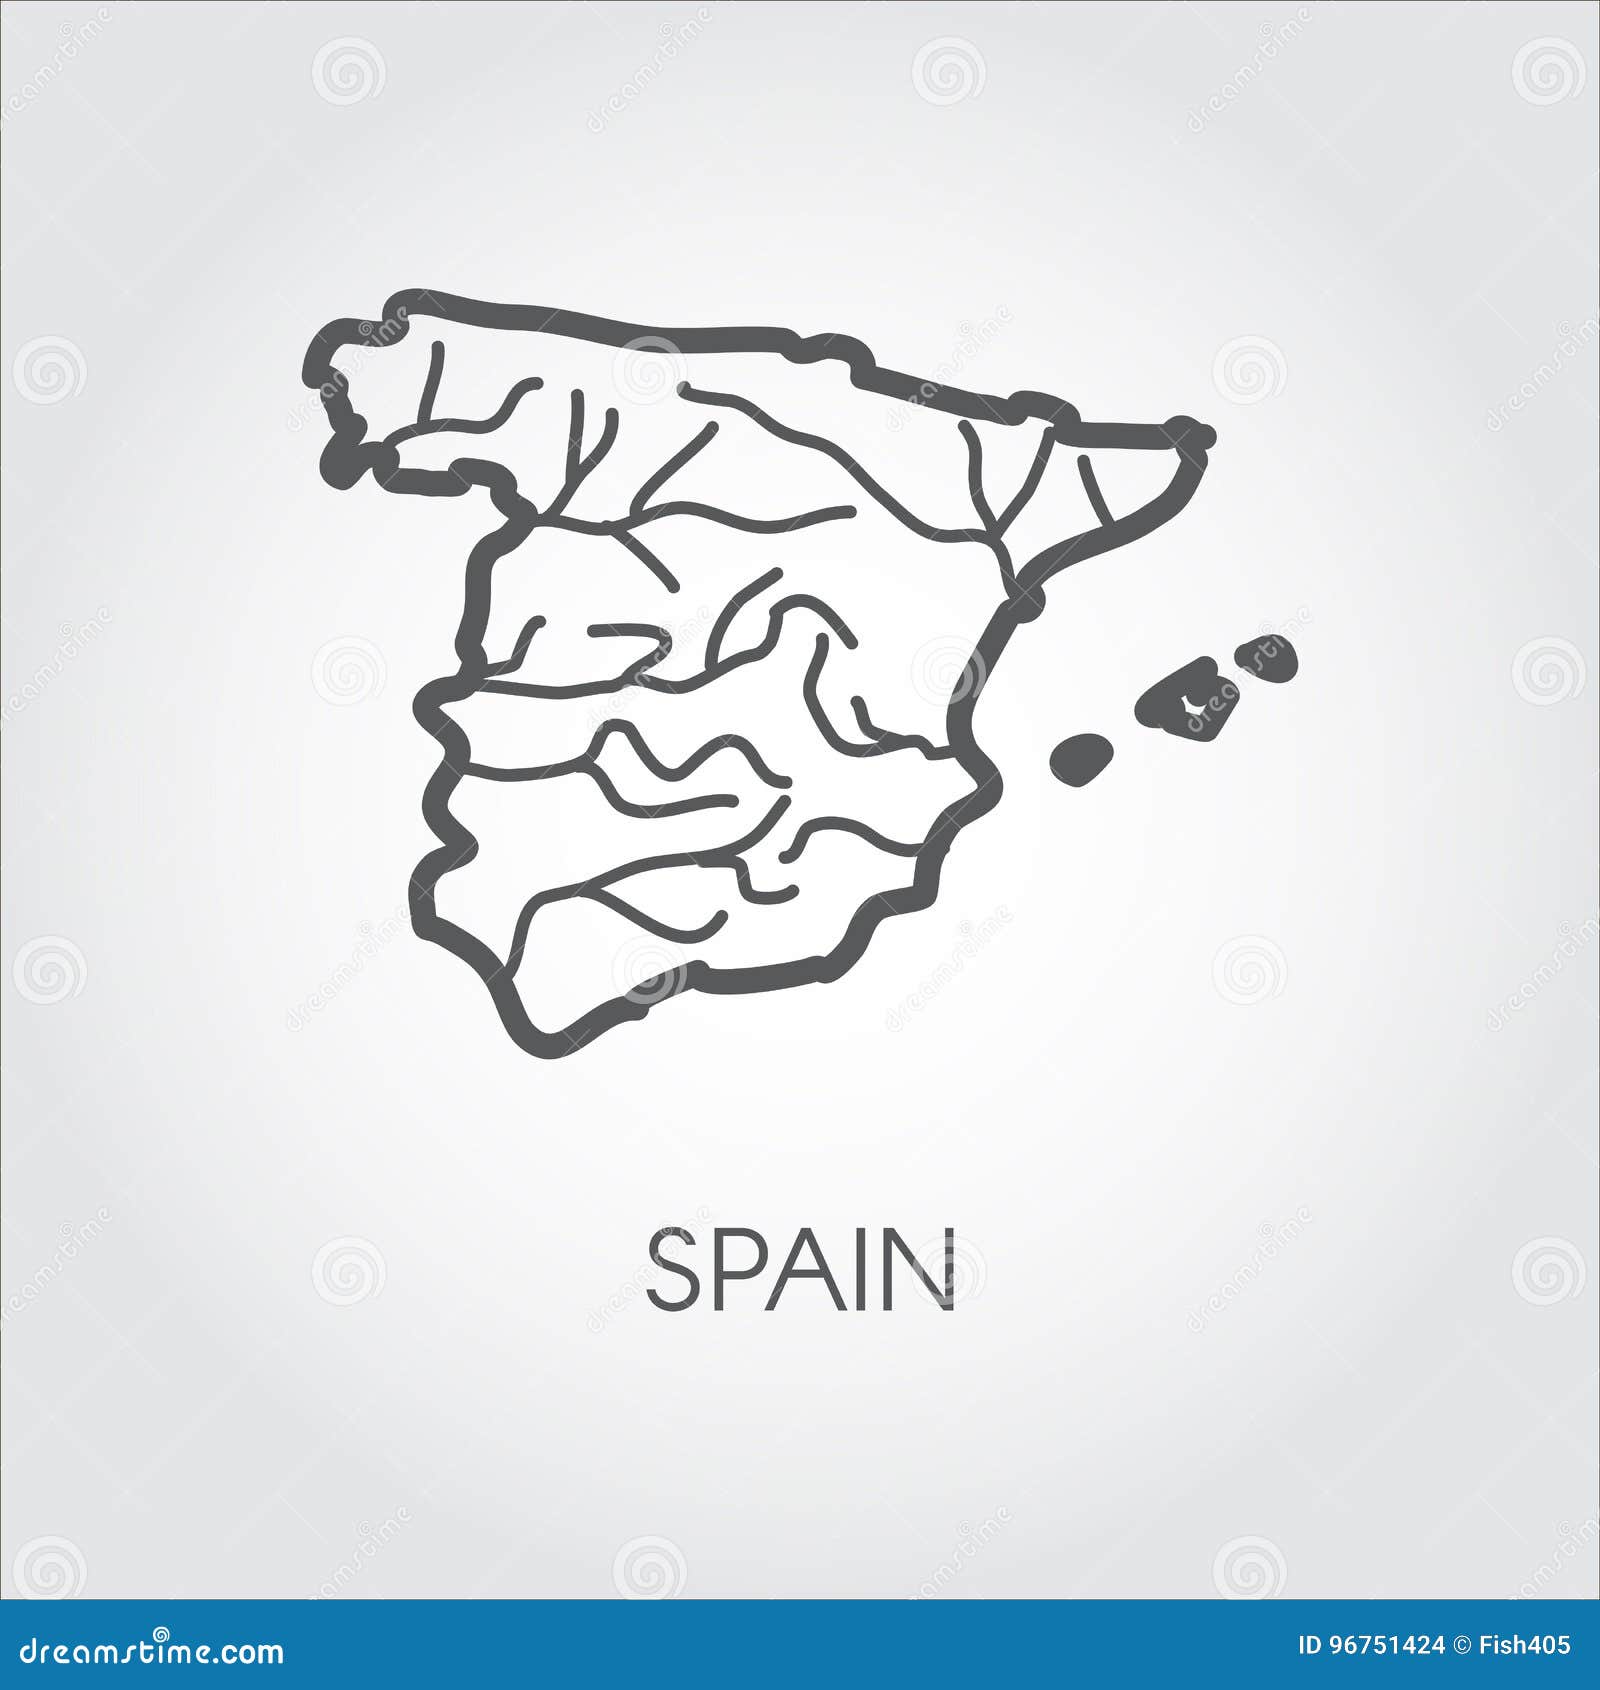 icon of spain country. graphic map in linear style for geography, cartography, education projects and other  needs